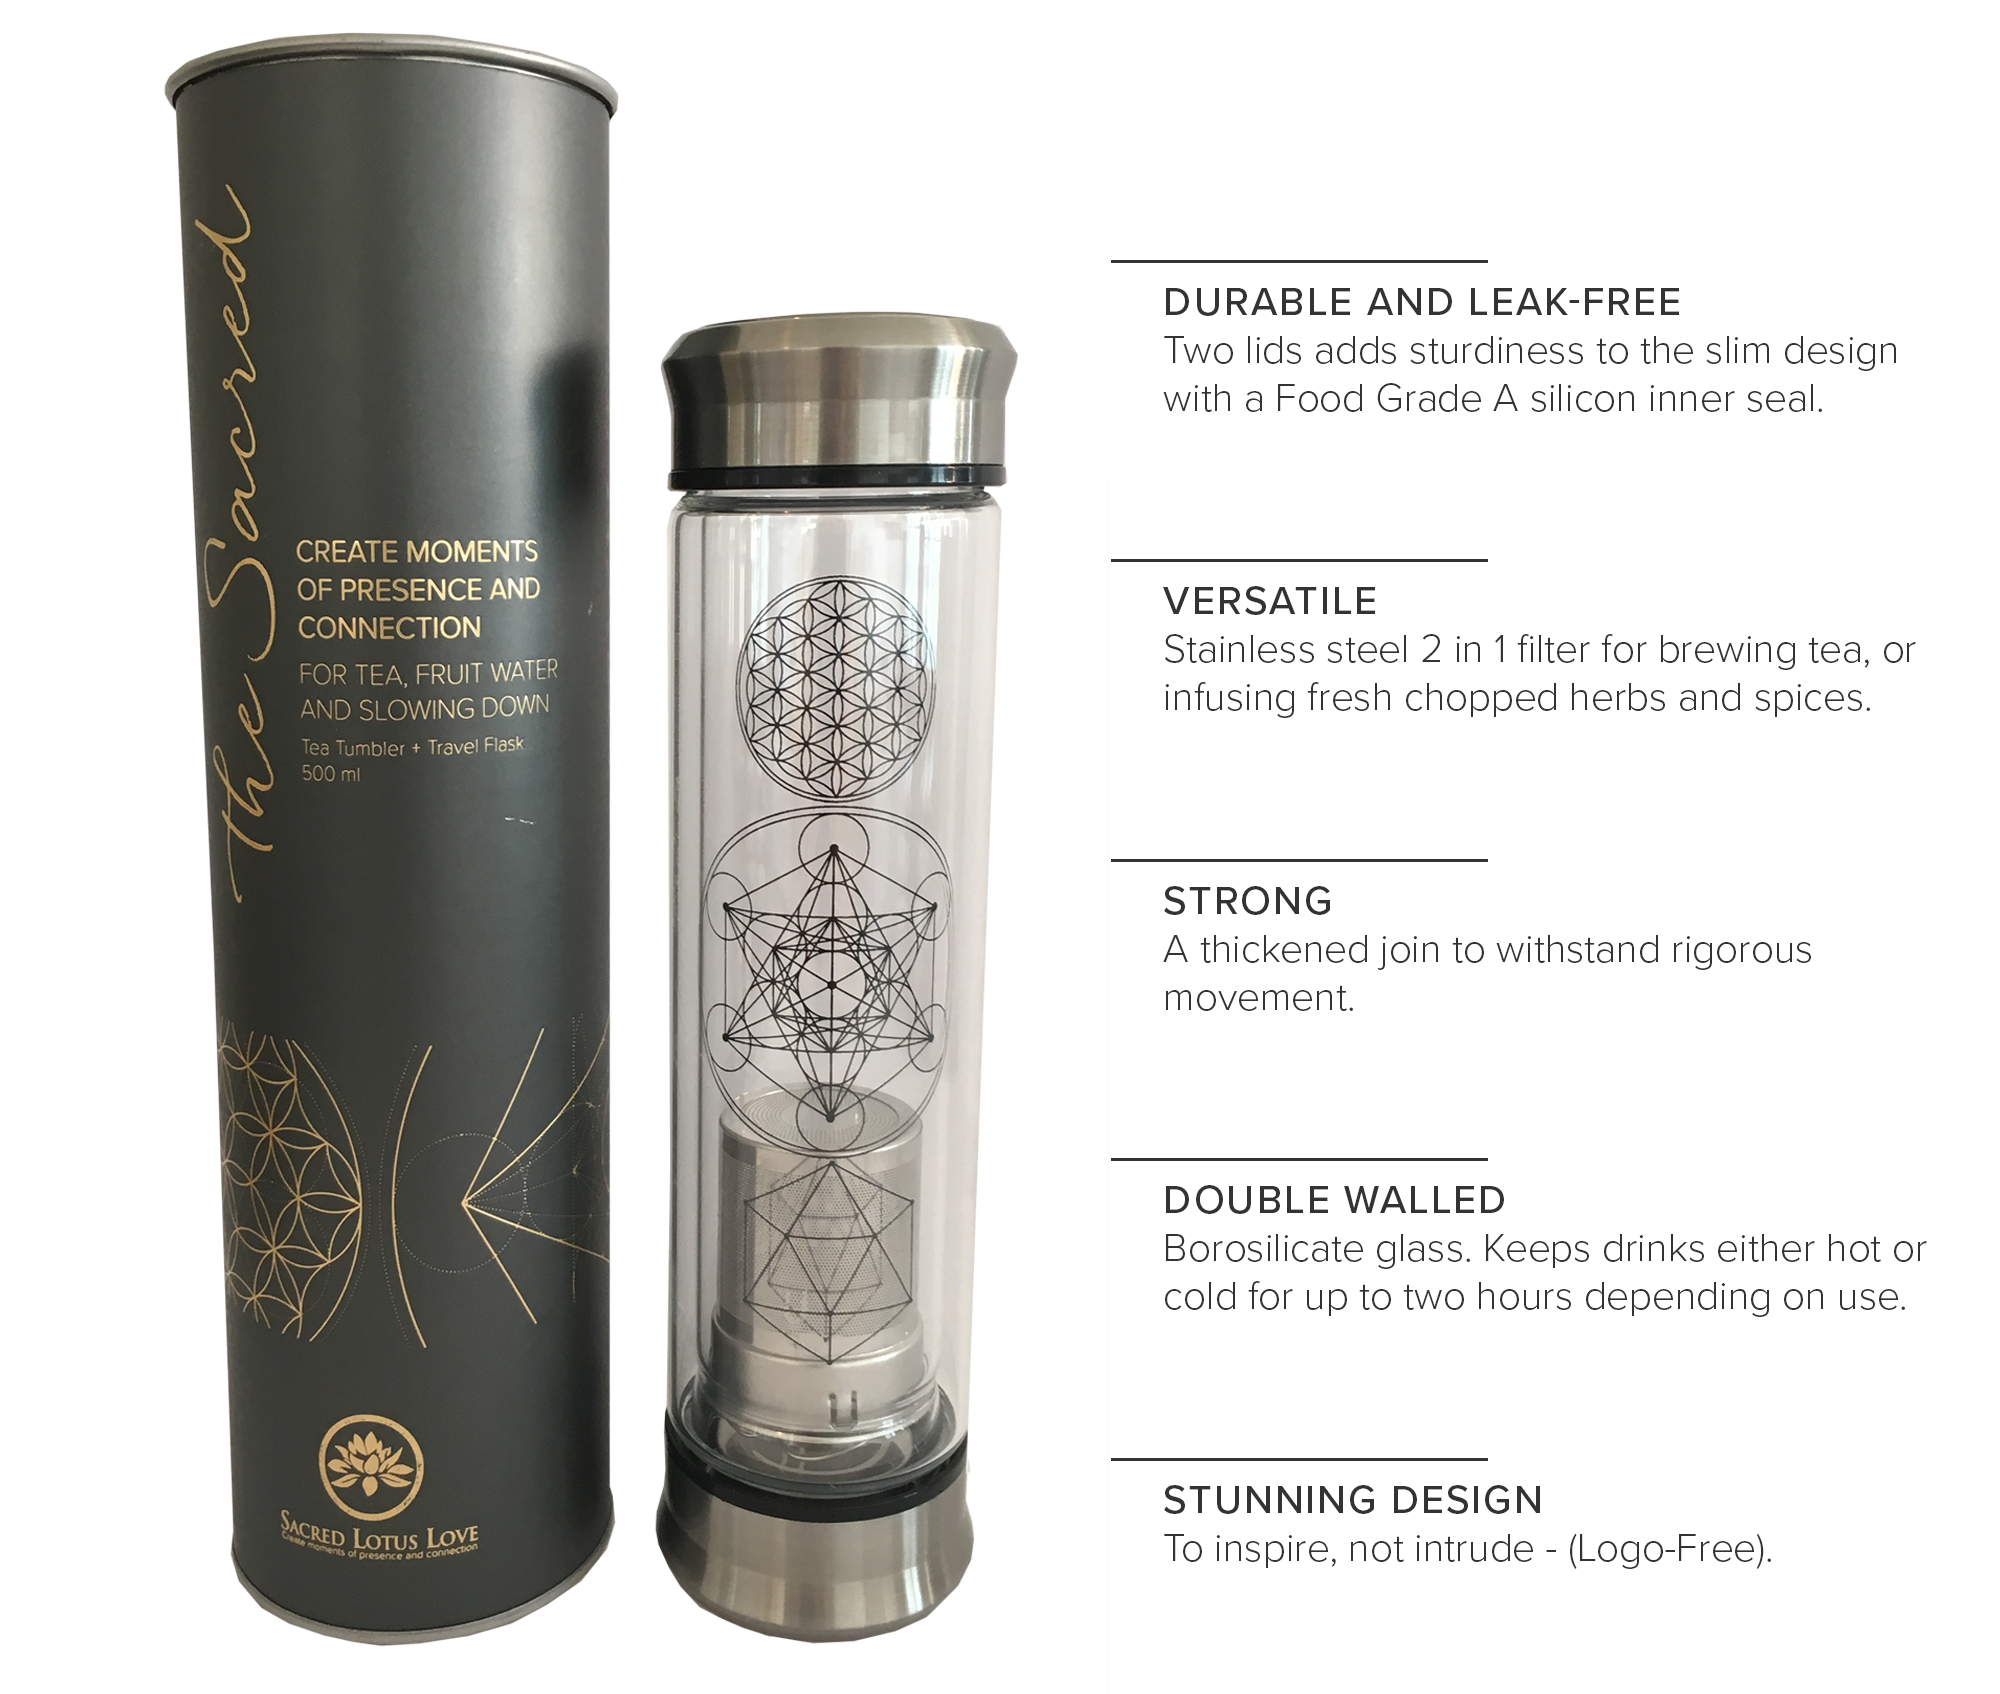 Tea Tumbler Travel Flask with Stainless Steel Strainer Infuser for Tea, Coffee and Fruit Infusions